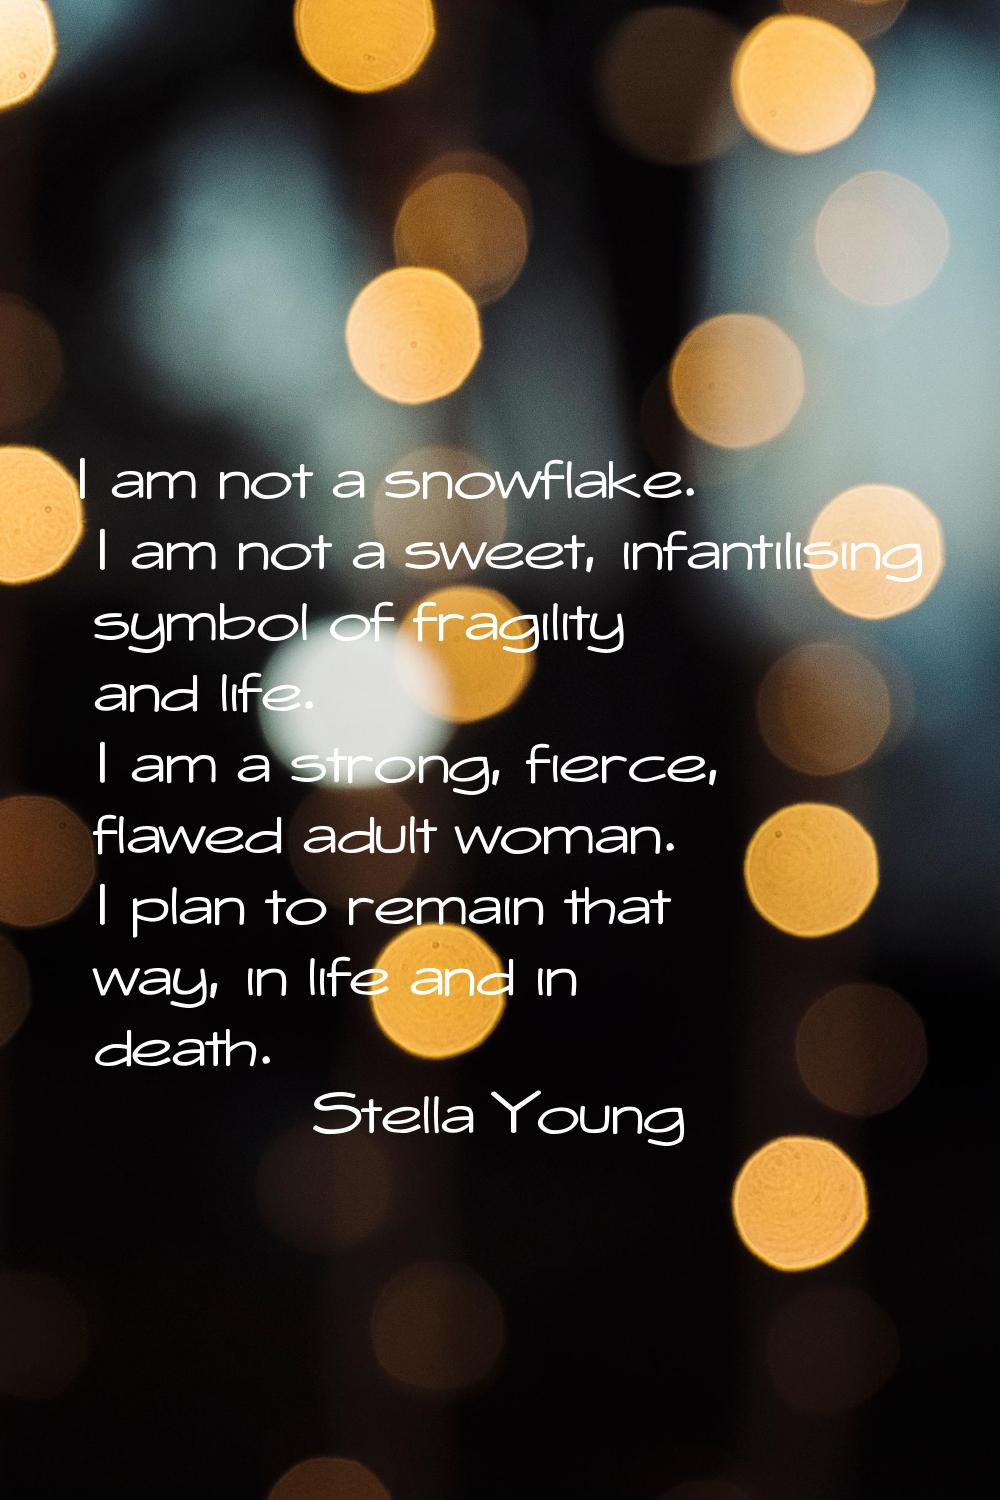 I am not a snowflake. I am not a sweet, infantilising symbol of fragility and life. I am a strong, 